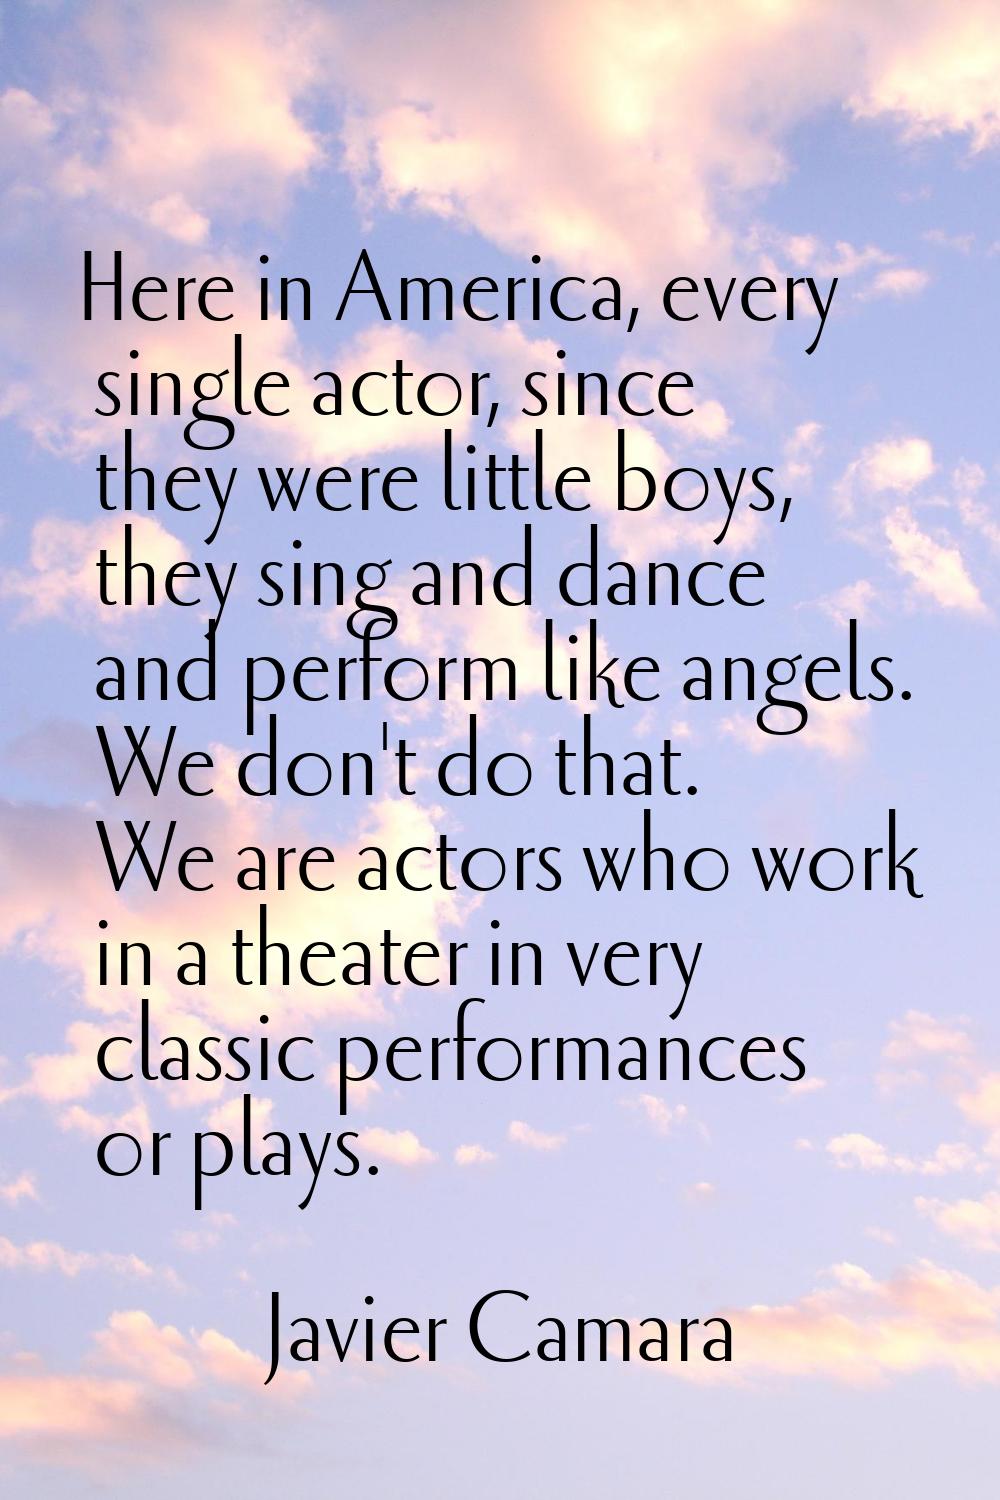 Here in America, every single actor, since they were little boys, they sing and dance and perform l